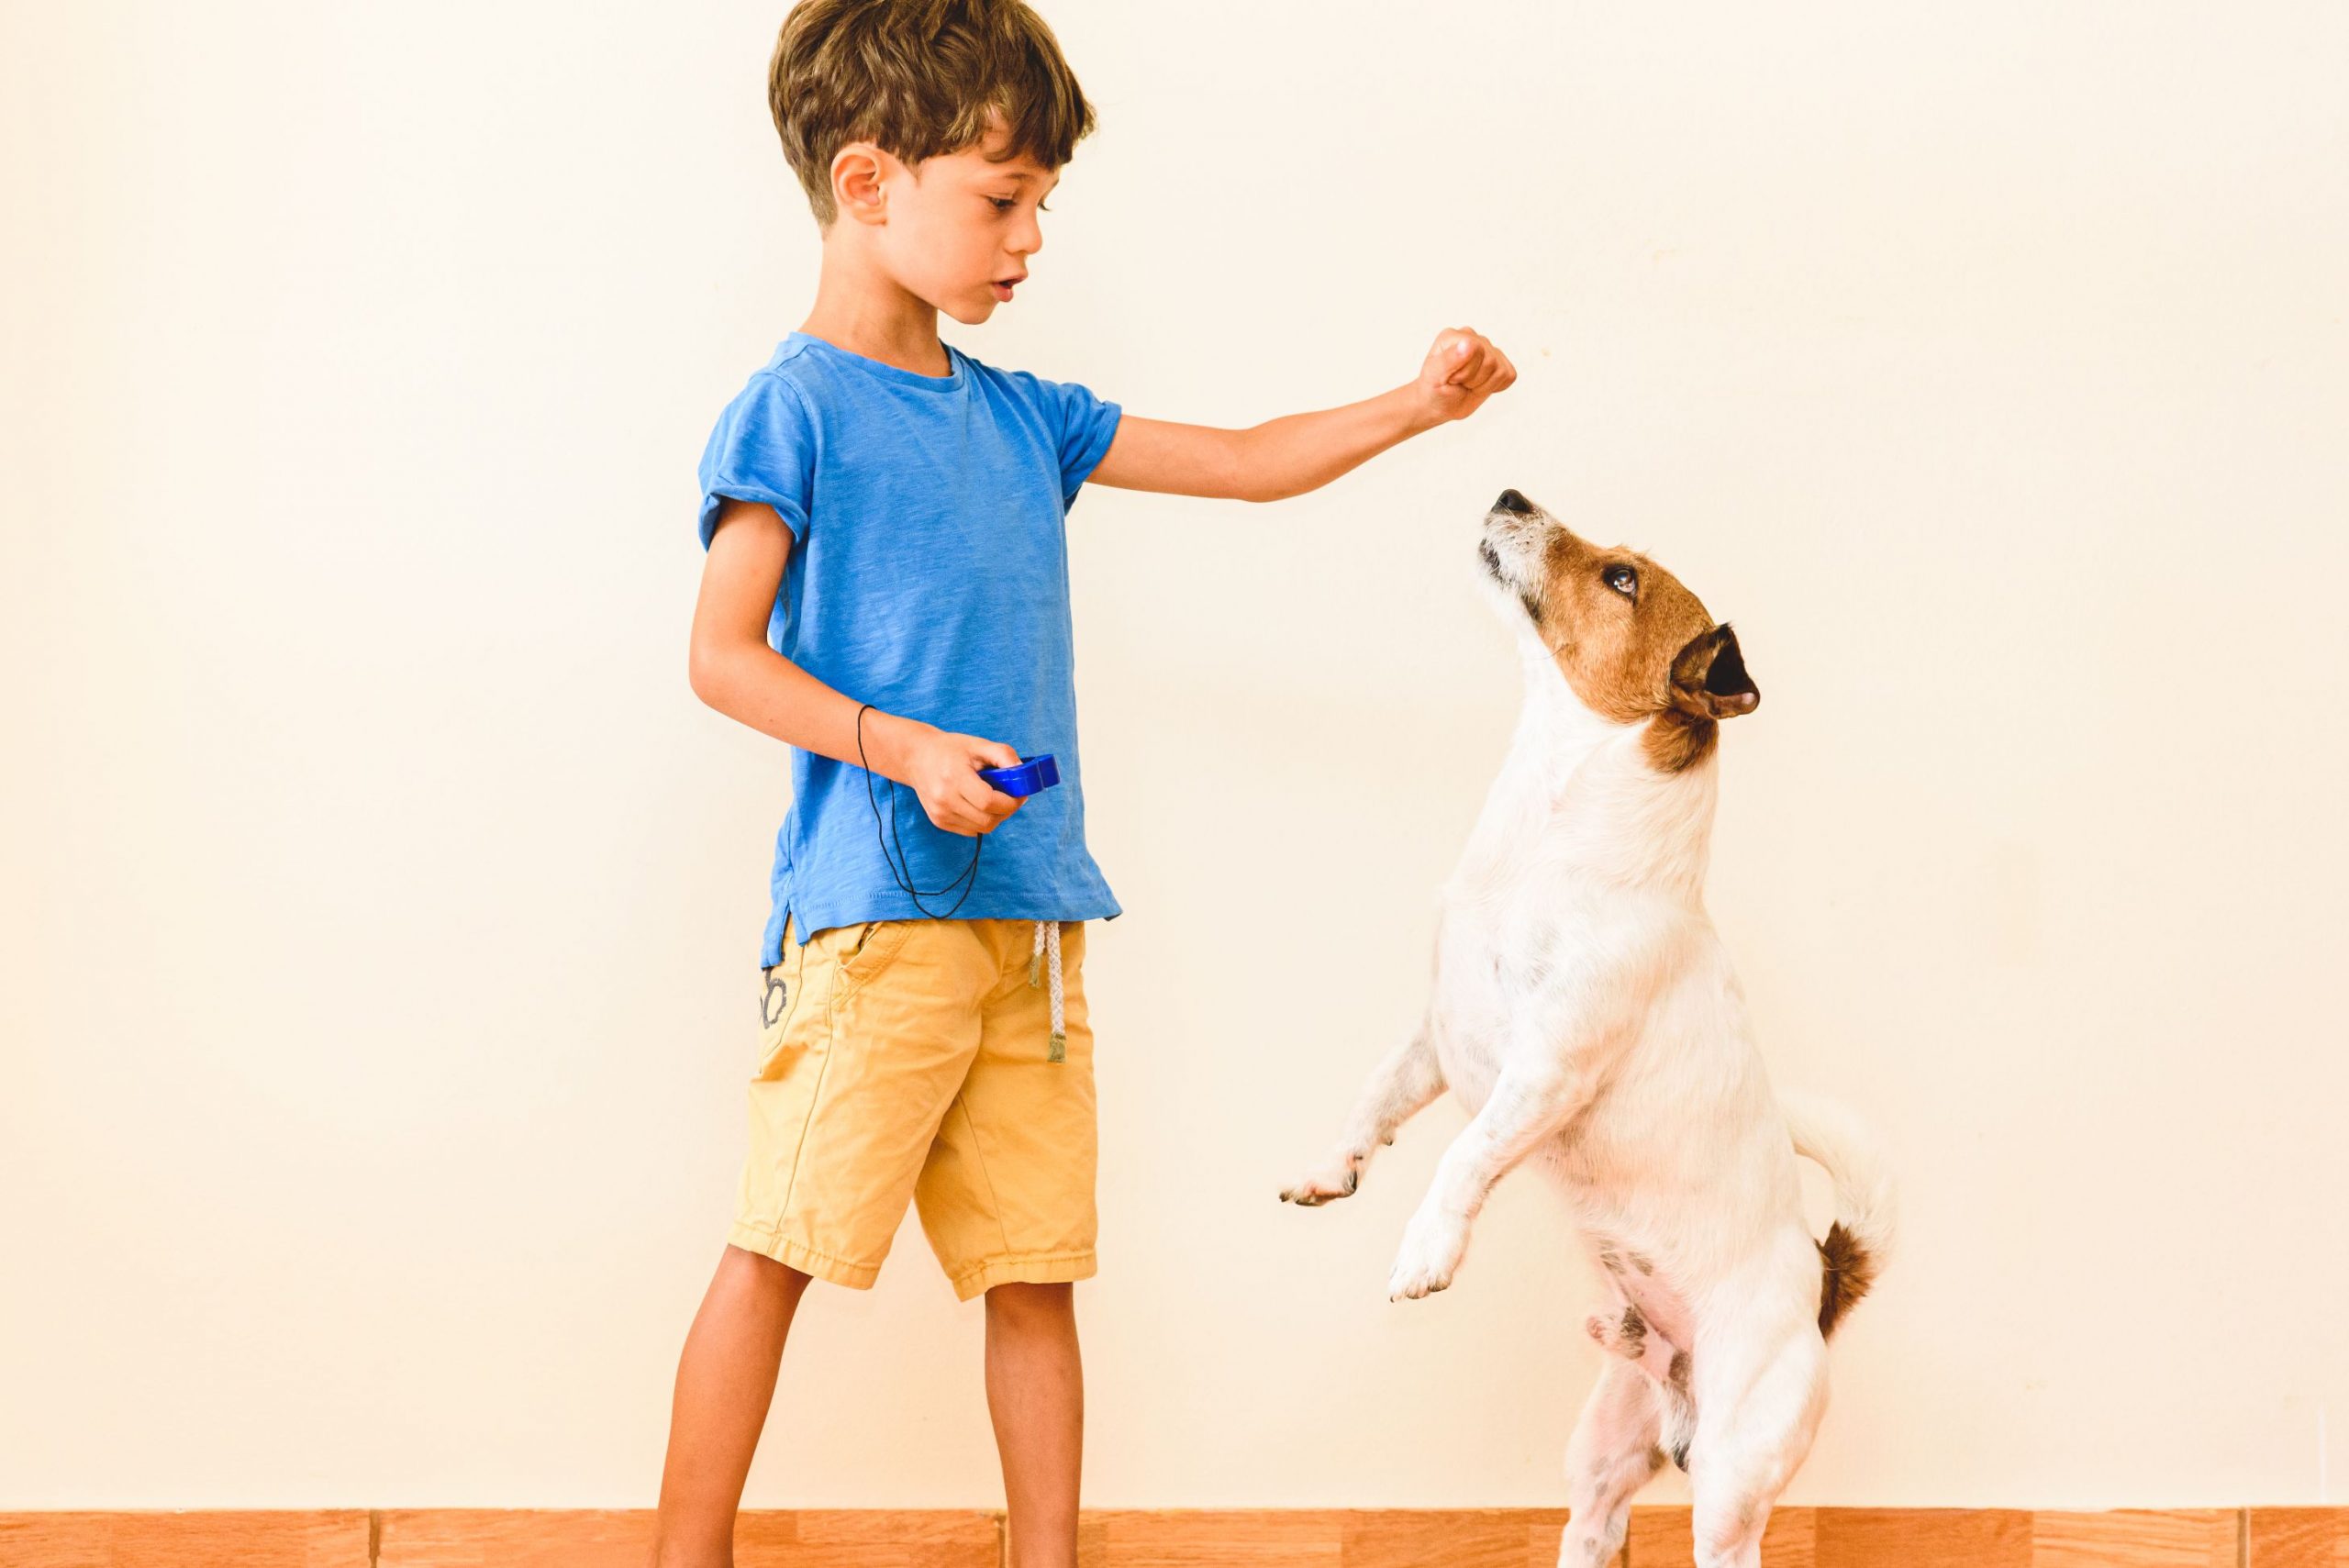 Clicker Training Your Dog: How Does It Work?